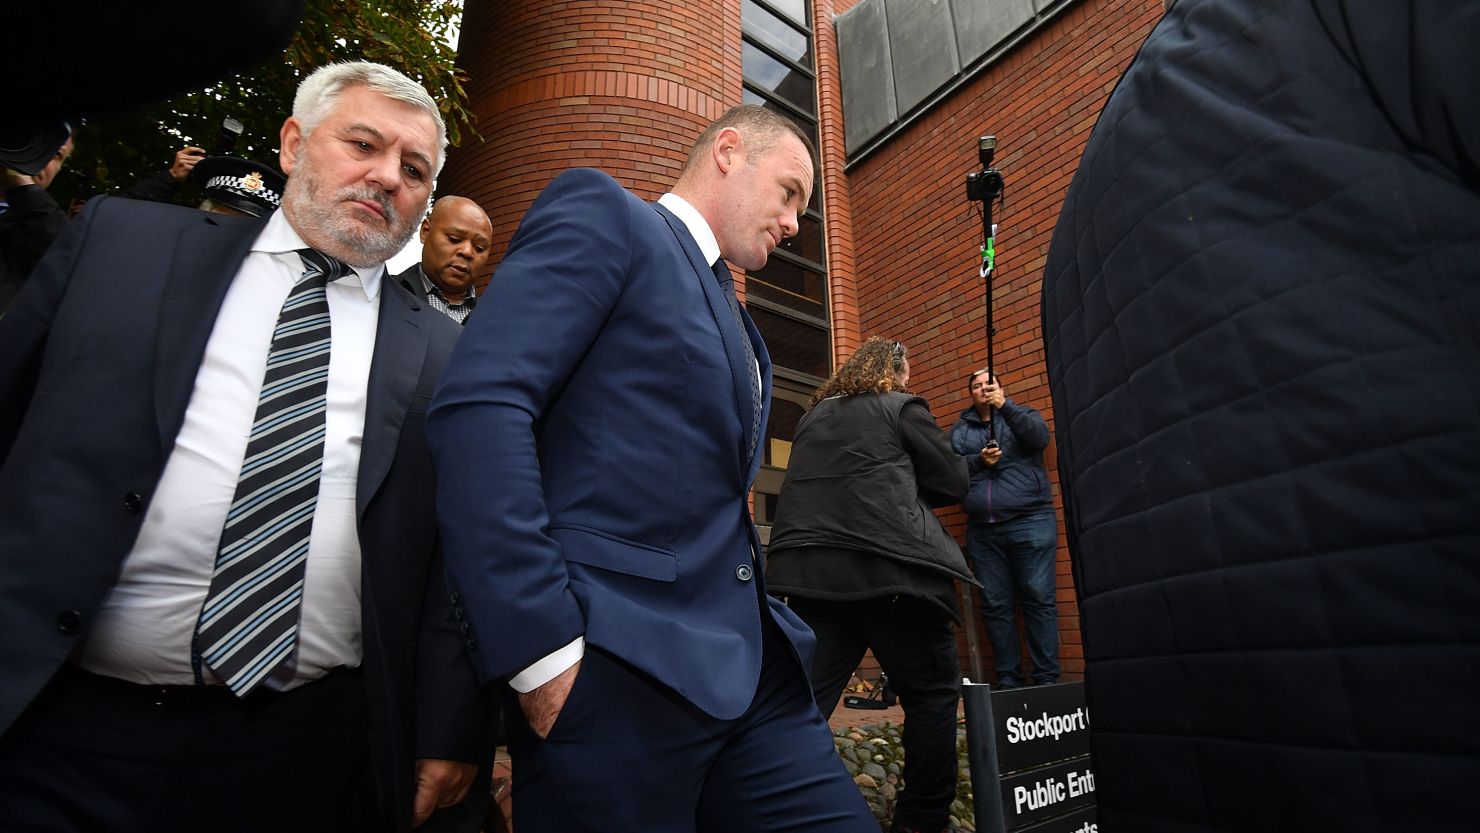 Wayne Rooney arrives at Stockport Magistrates Court on Monday